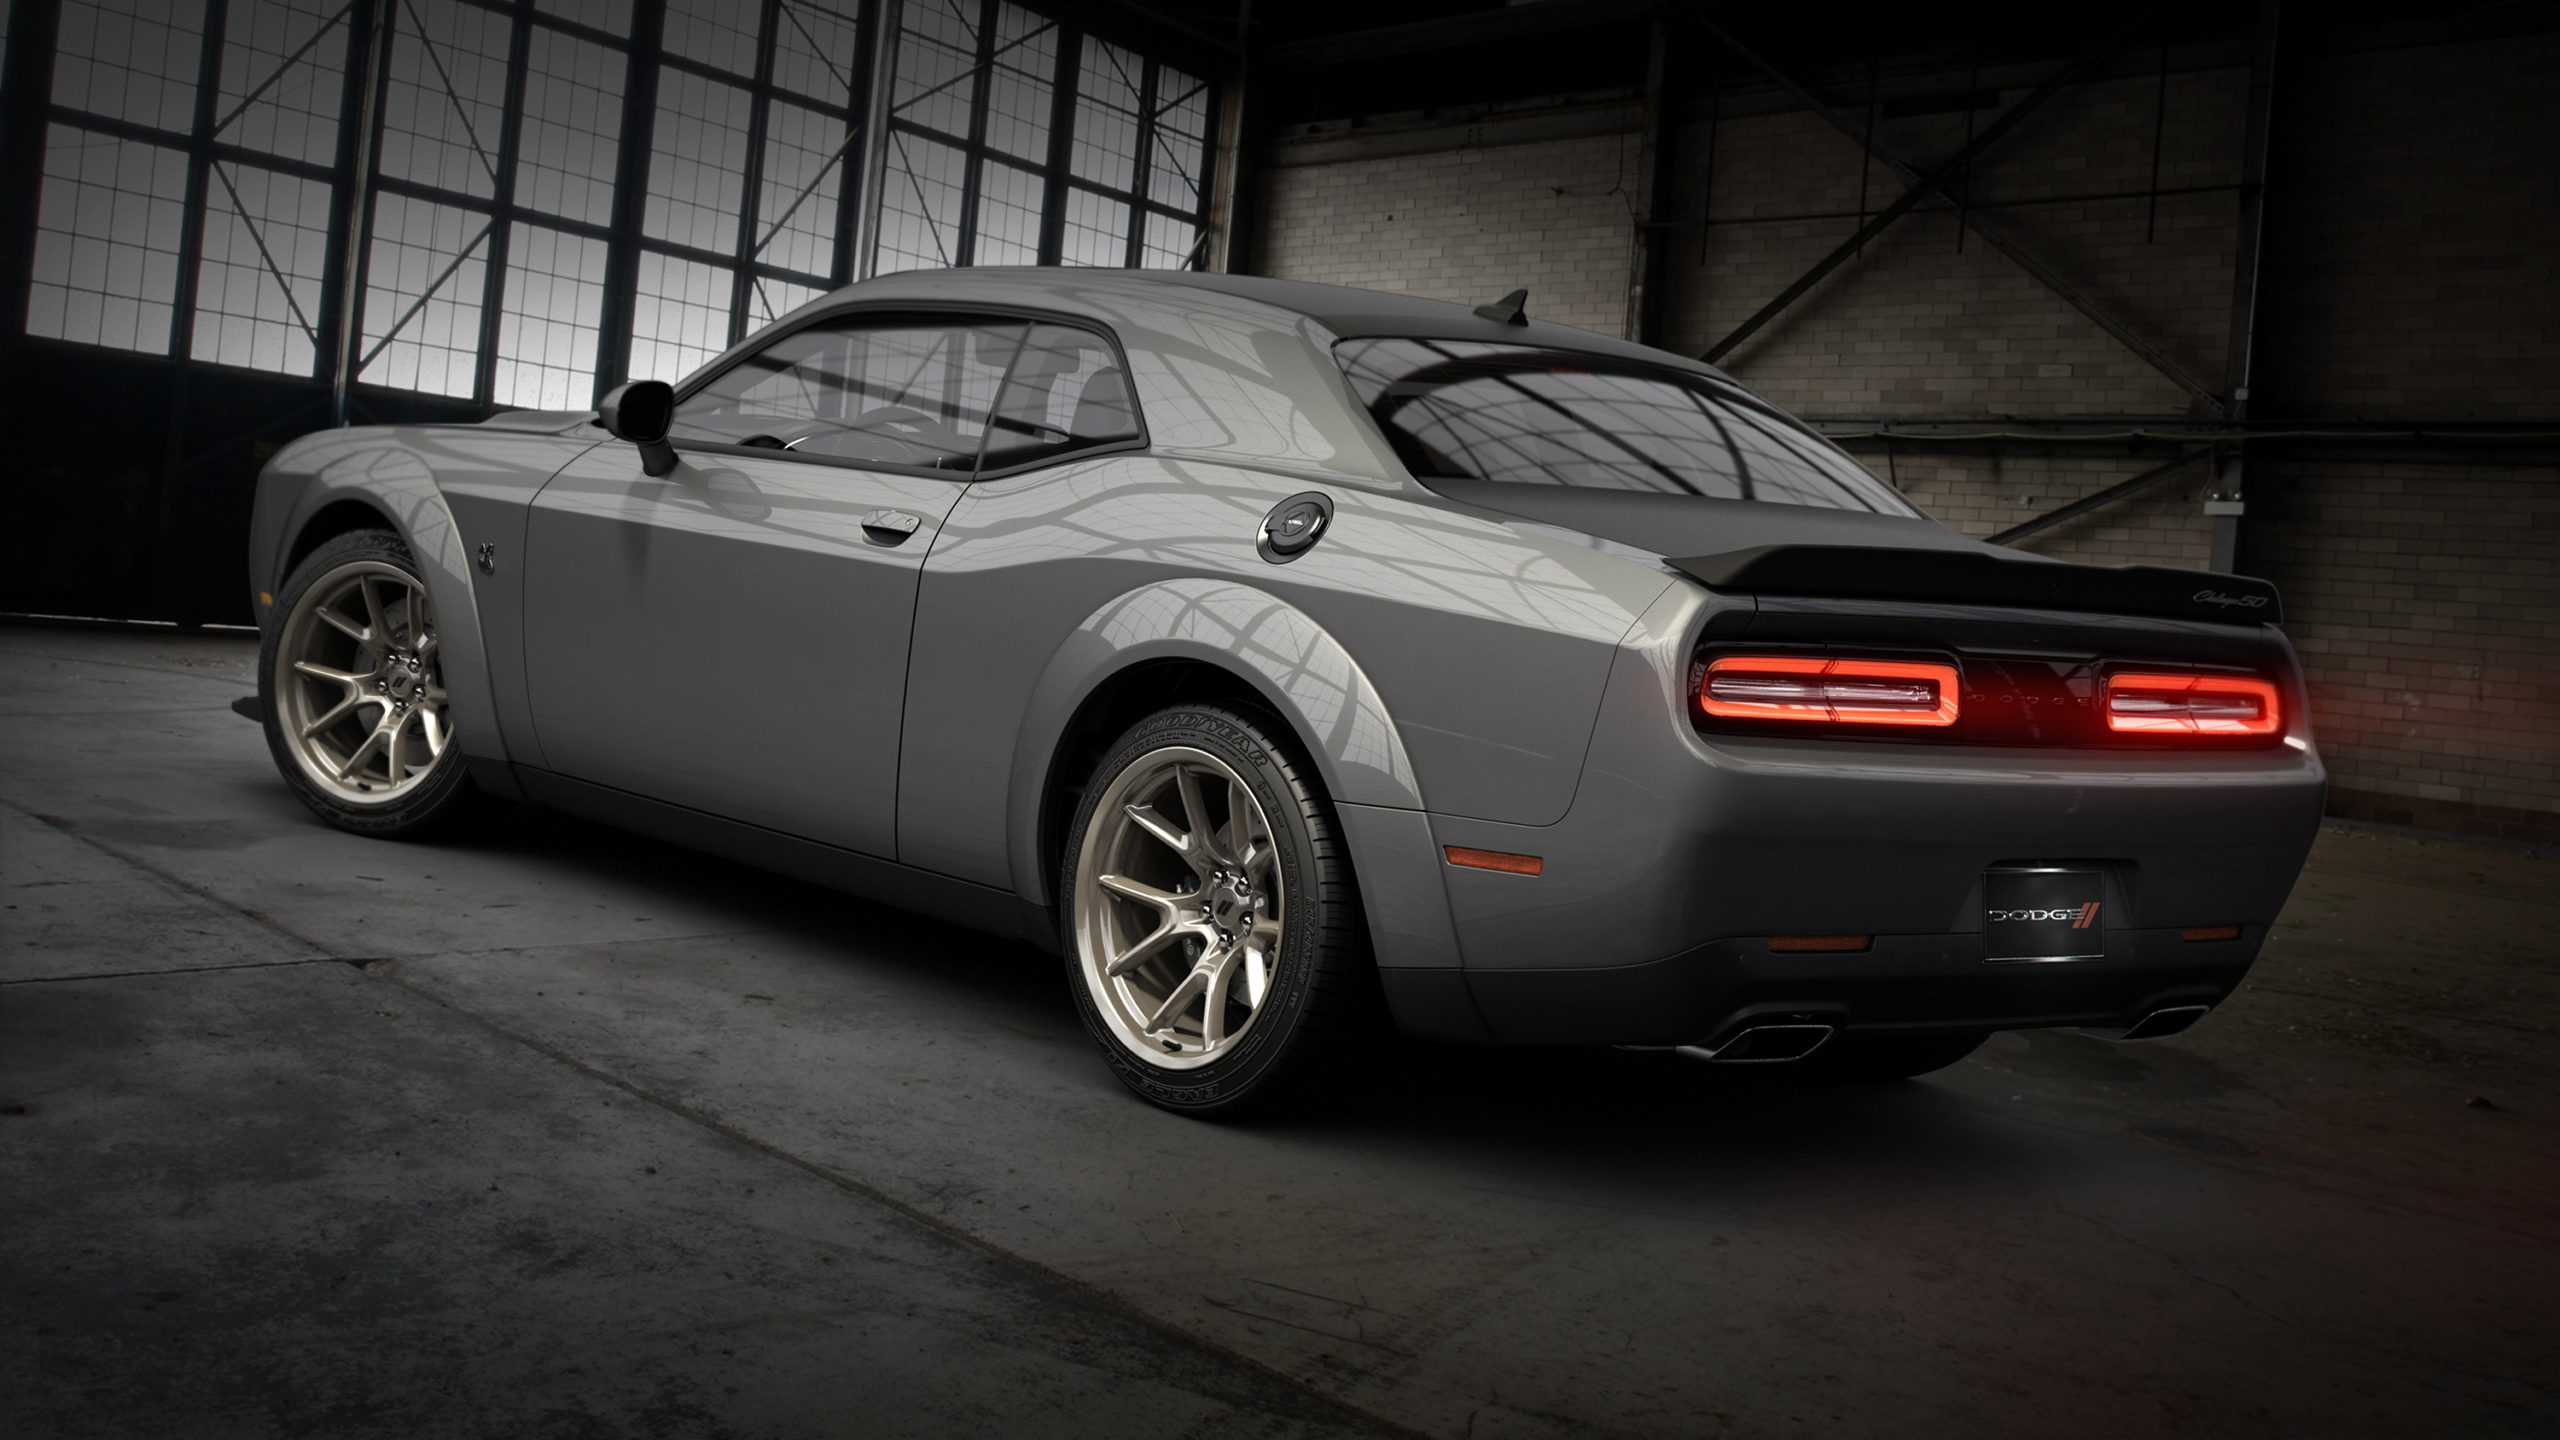 Dodge Celebrating Challenger’s 50th Anniversary with Commemorative Edition | THE SHOP